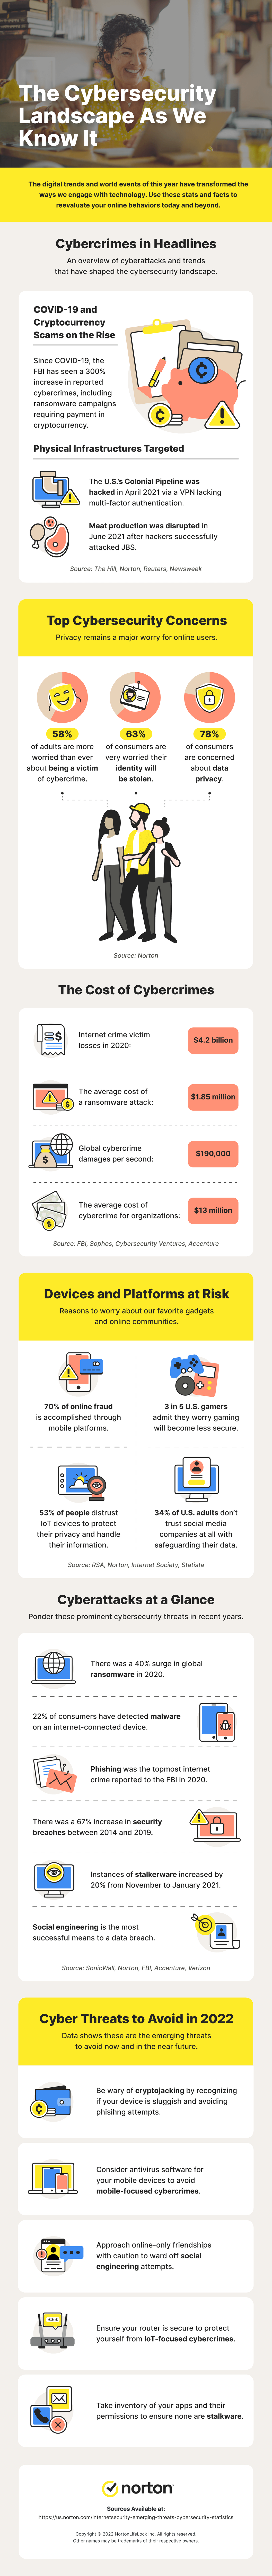 An infographic covers various cybersecurity statistics ranging from top cybersecurity concerns, the cost of cybercrimes, cyber threats to avoid, and more.